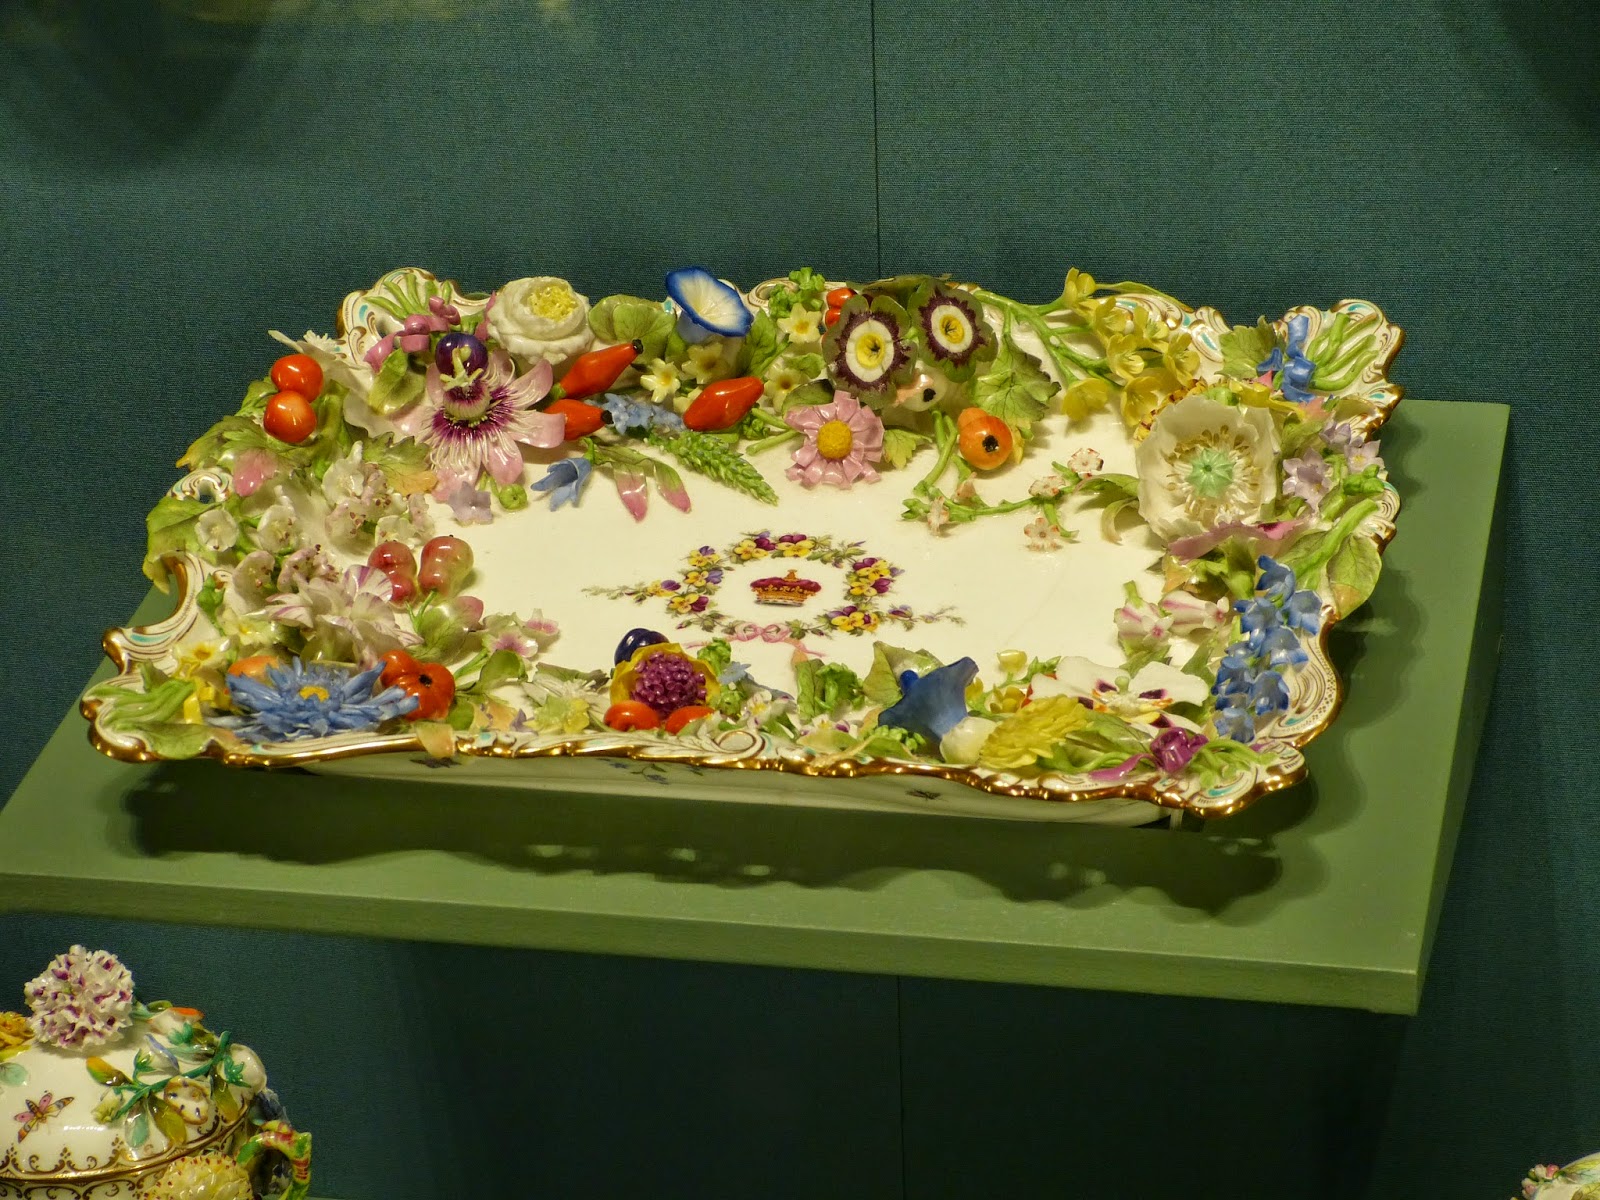 Minton soft porcelain pen tray (c1833)  belonging to the young Queen Victoria